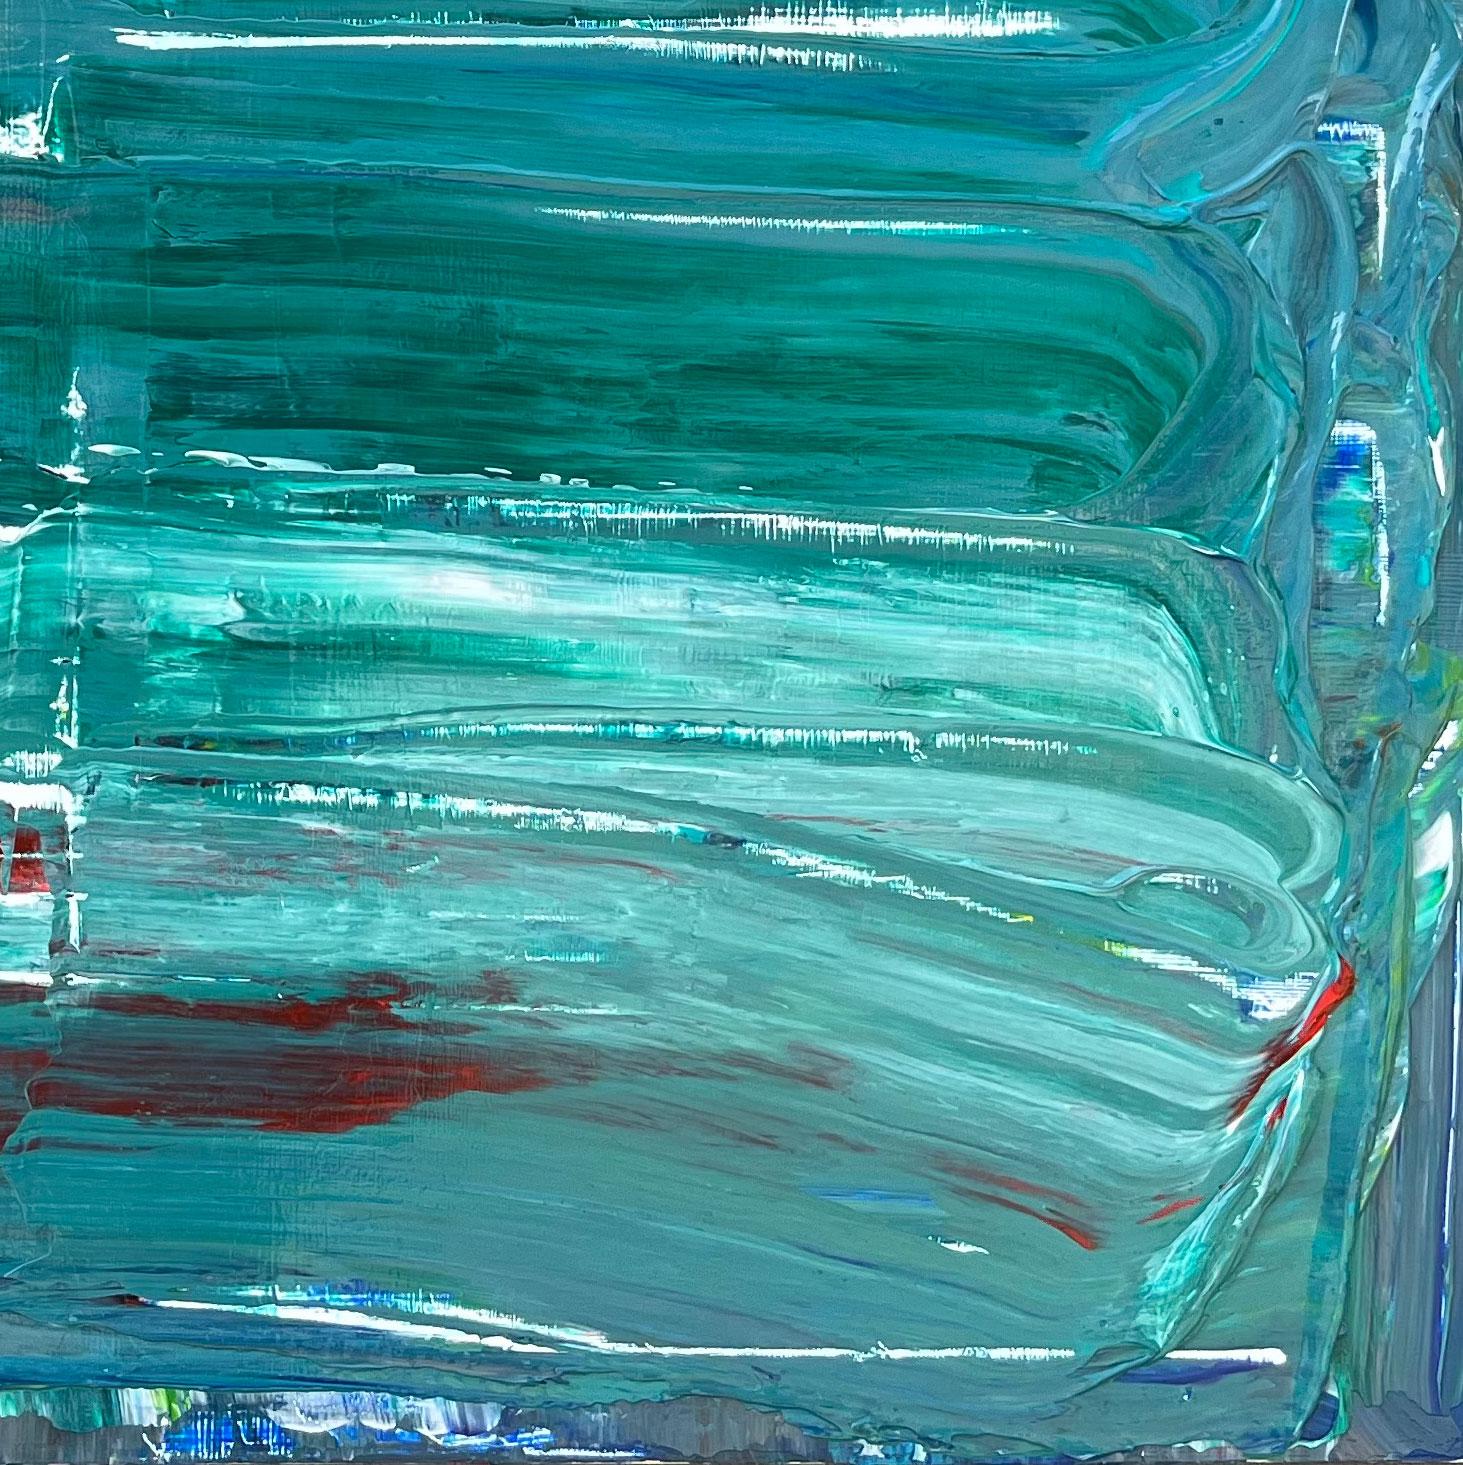 Climate Change - Venezia - Blue Abstract Painting by Antonio Franchi